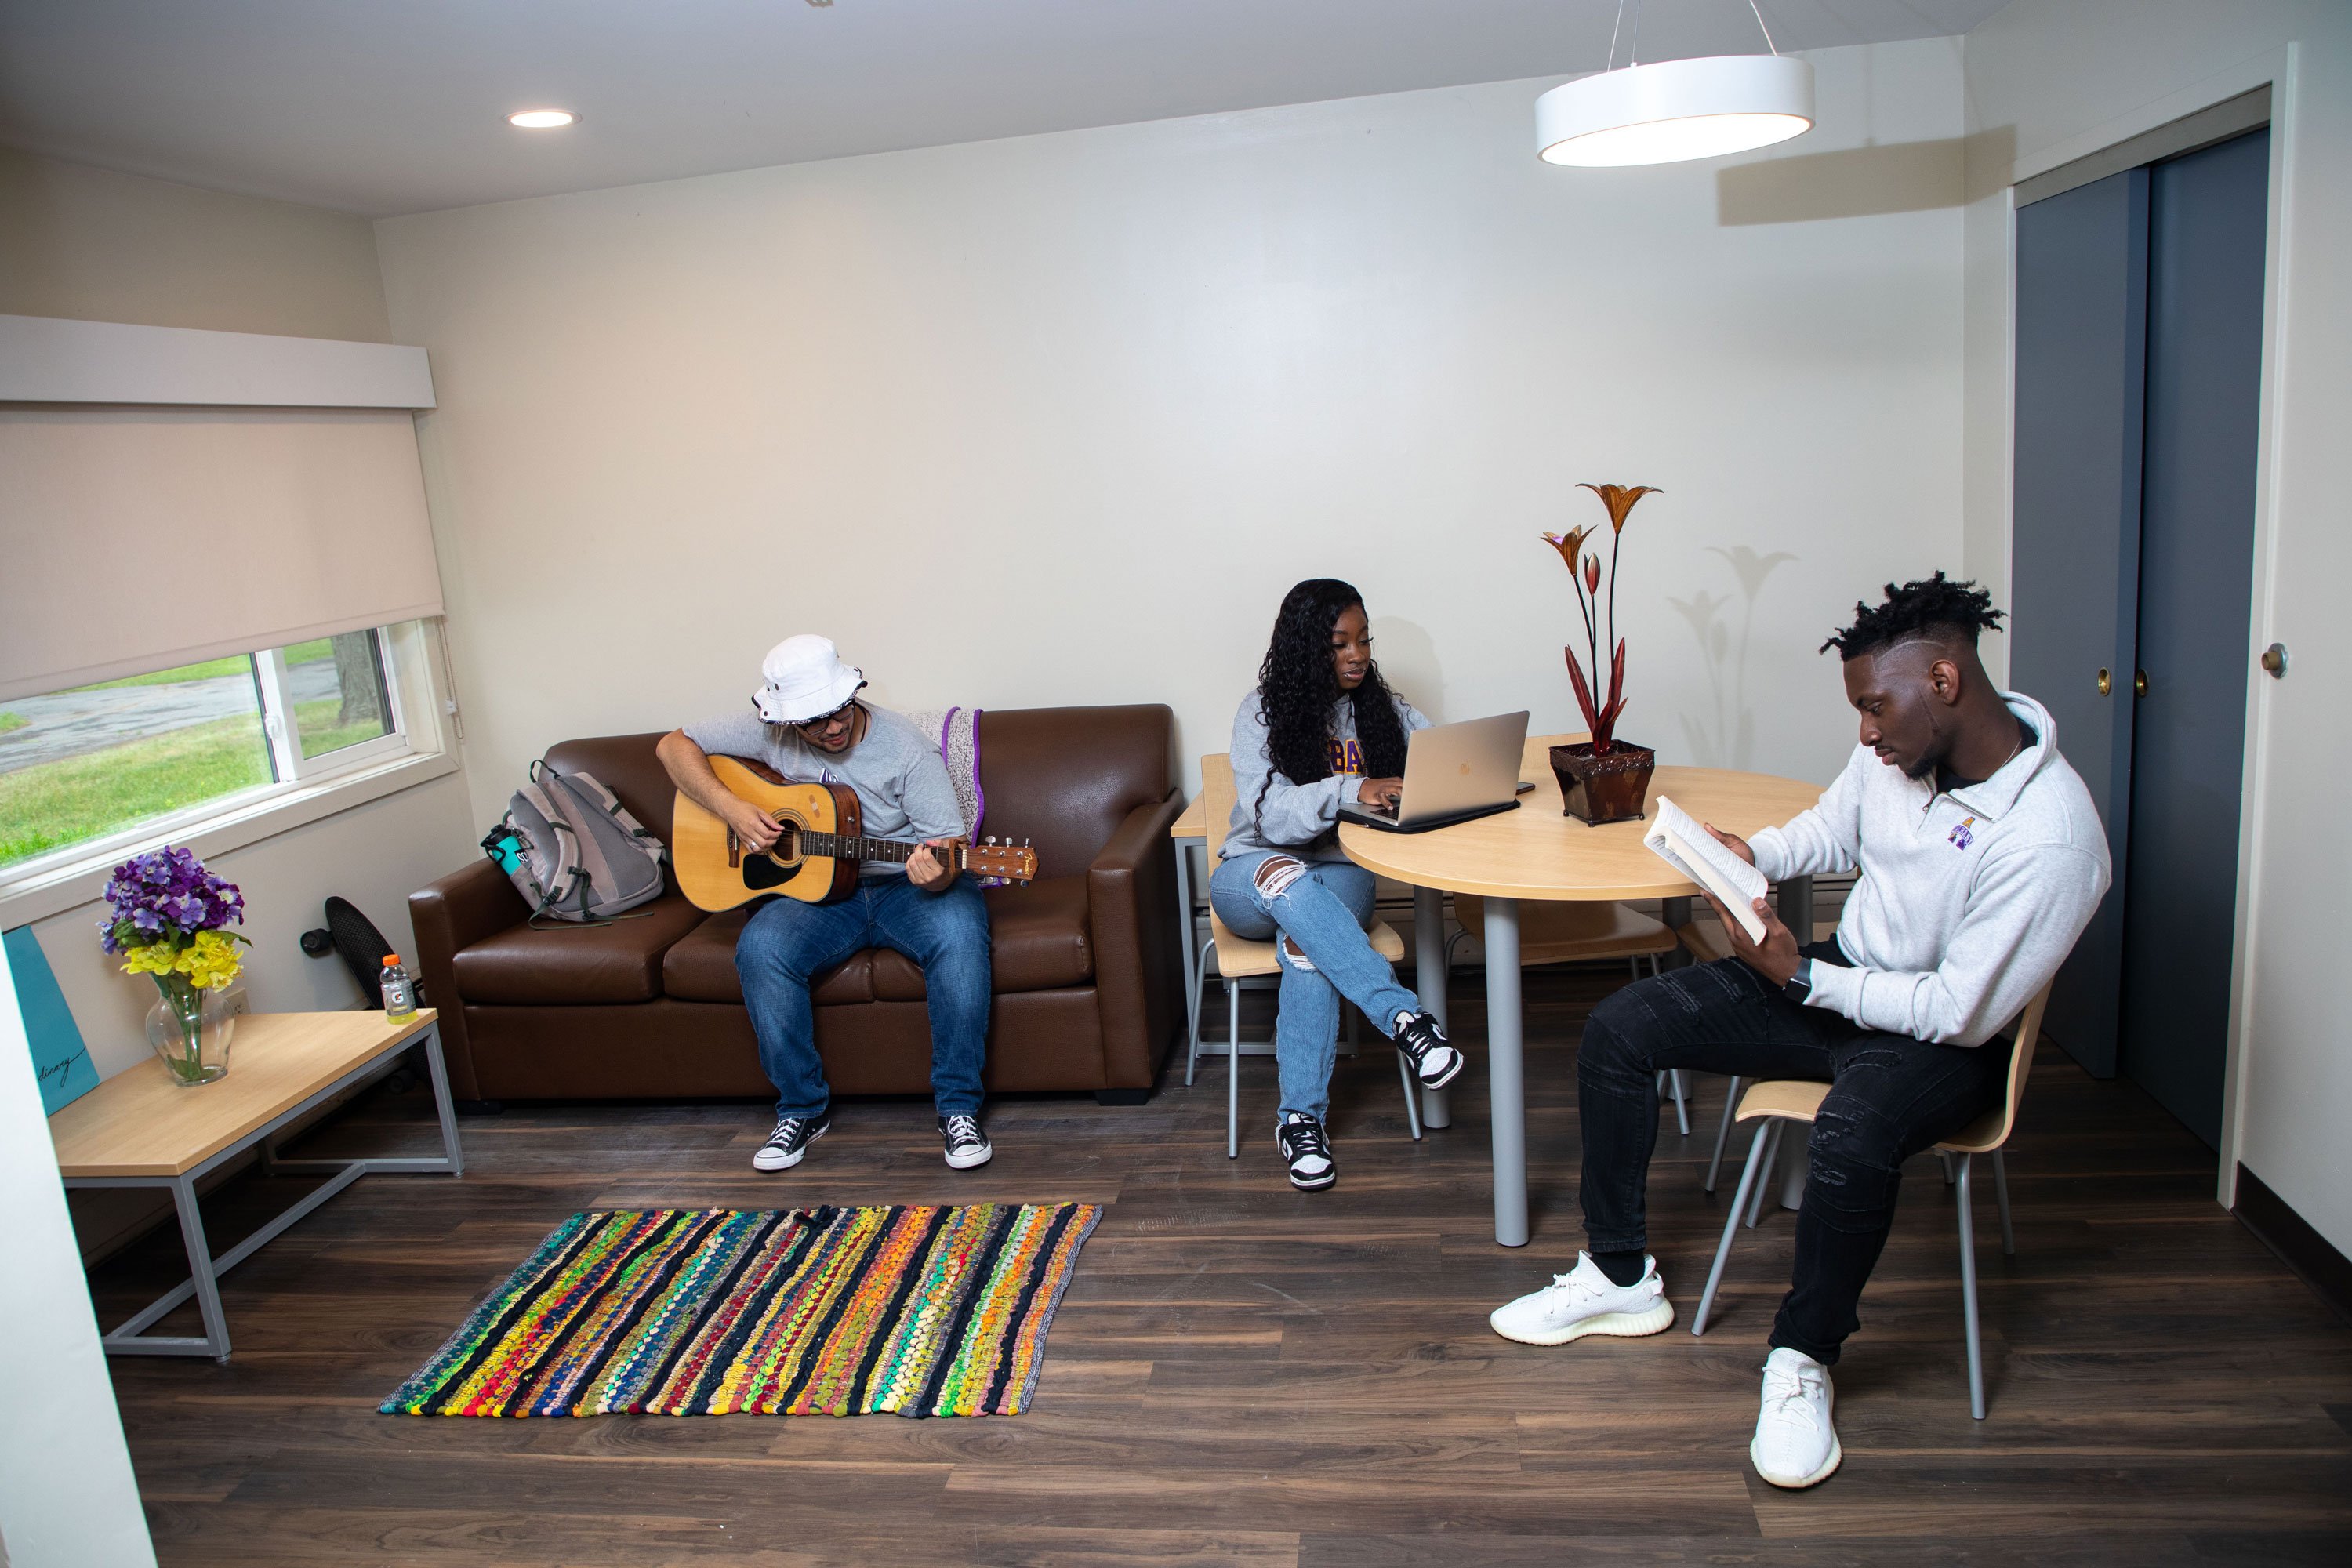 Three students sit inside a living room with a four-seater table and a brown couch. One student plays guitar, another works on a computer and a third reads a book.